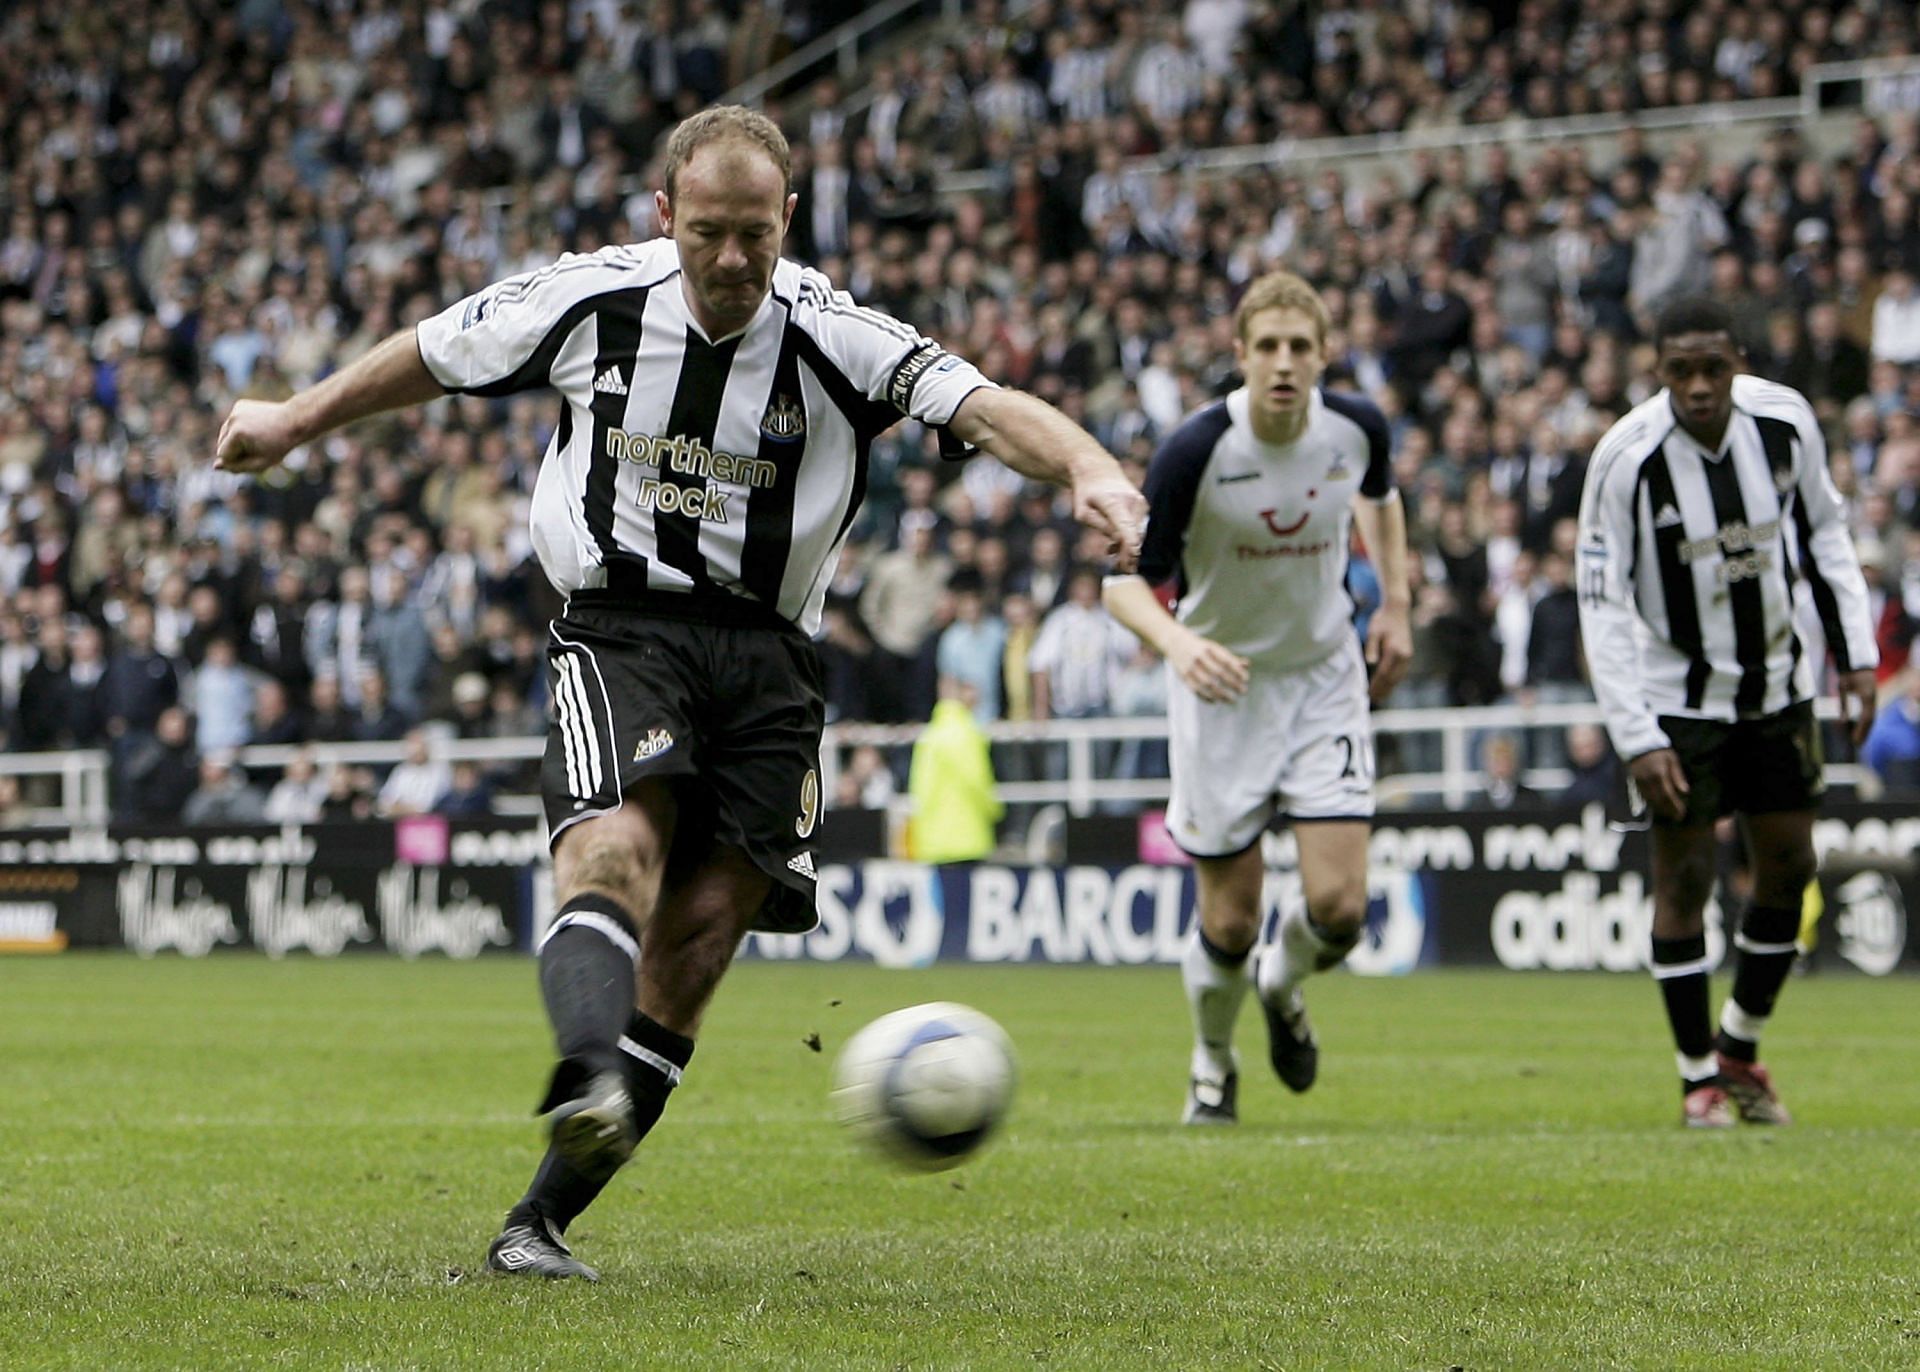 Alan Shearer was one of the top players that Ferguson always wanted to sign